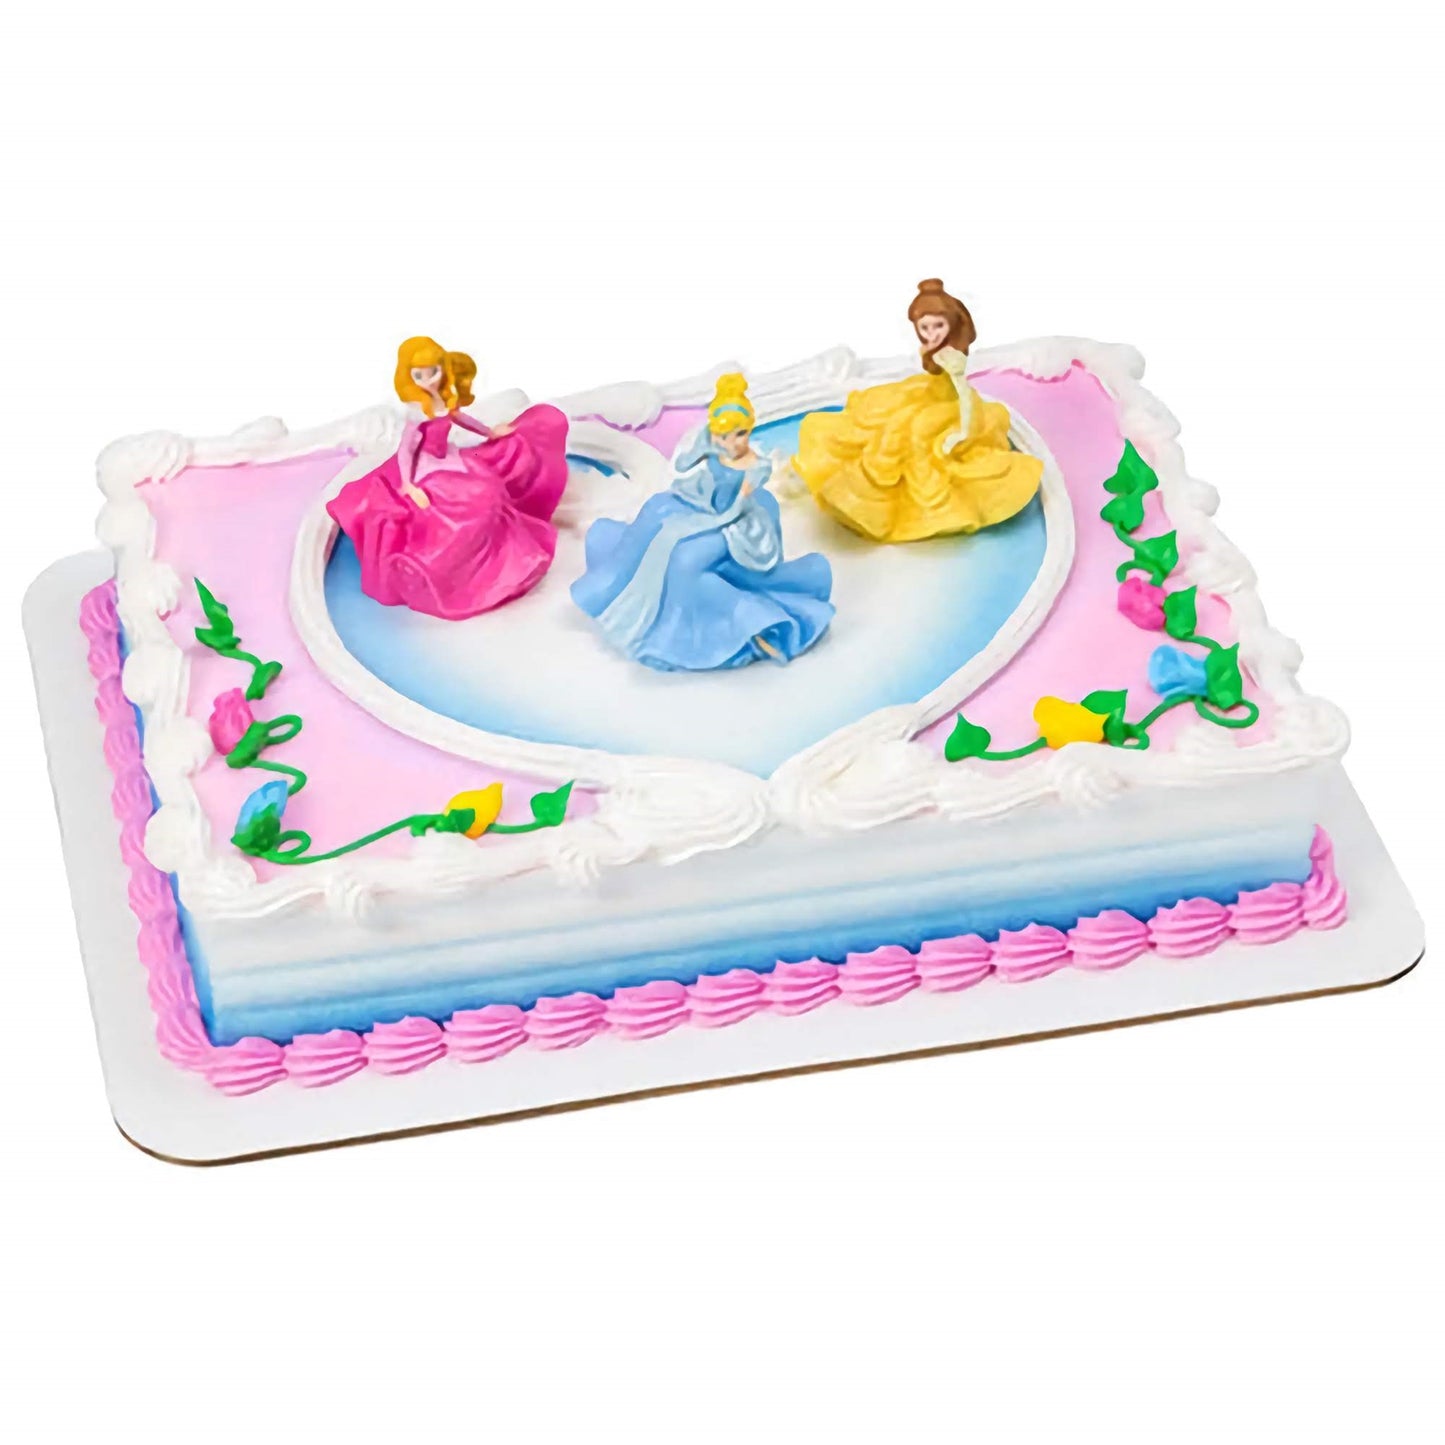 Decorative cake kit with three classic Disney Princess figurines in dancing poses, surrounded by colorful icing details, for a magical birthday cake from Lynn's Cake, Candy, and Chocolate Supplies.